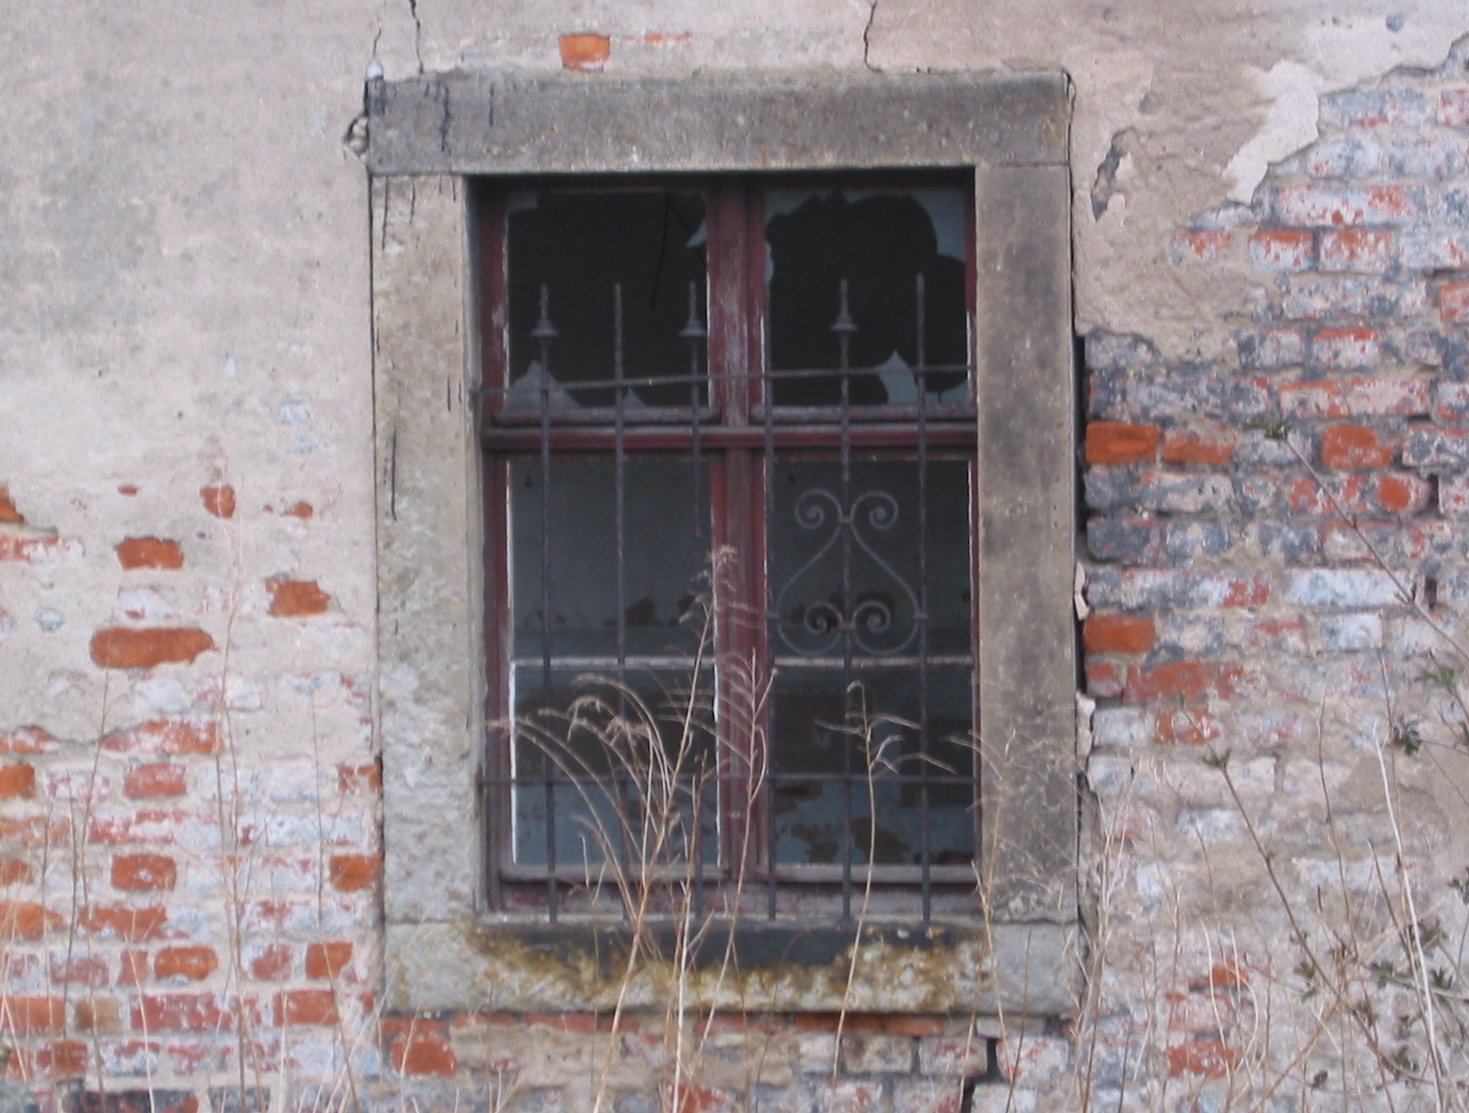 the windows of an old building have a barred window